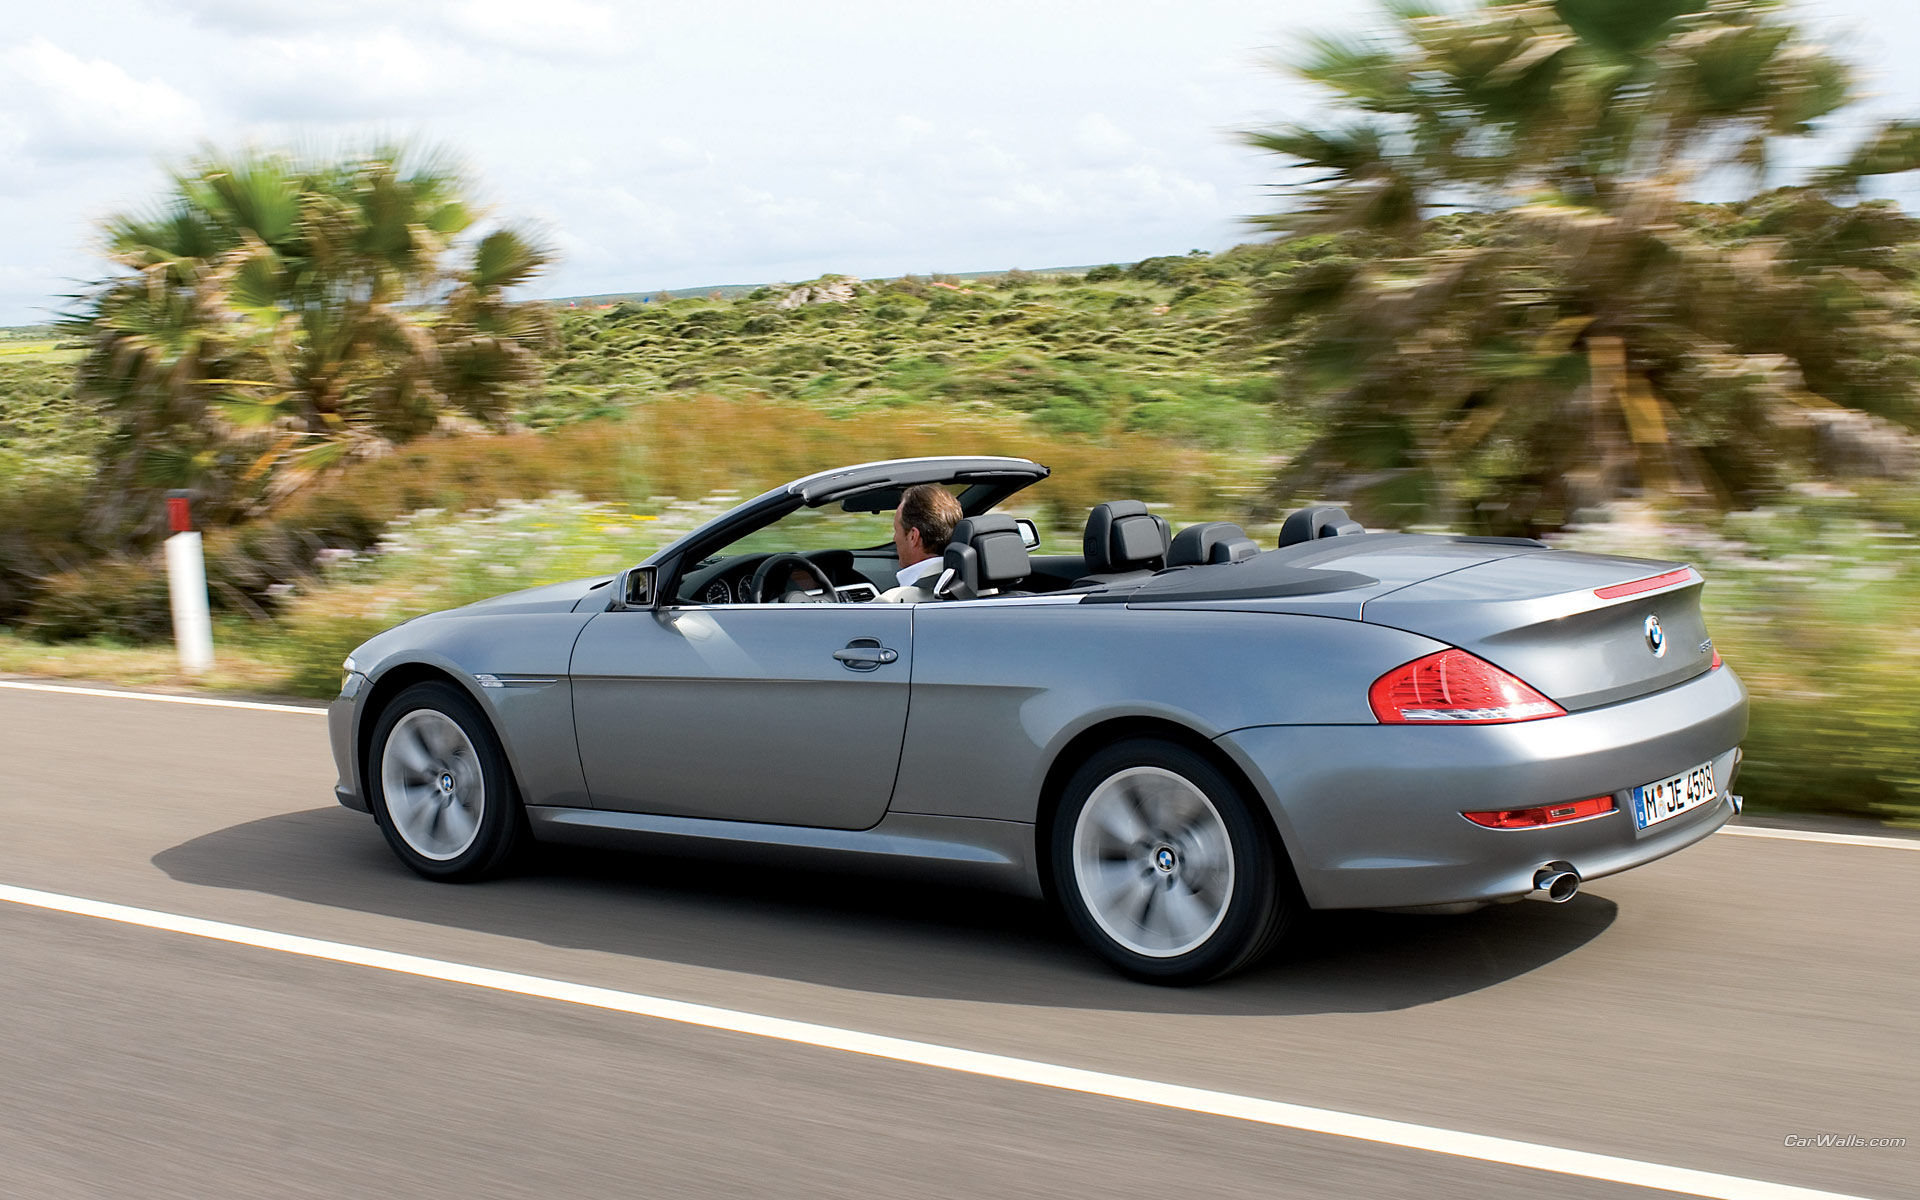 Download High quality 6 series cabriolet Bmw wallpaper / 1920x1200